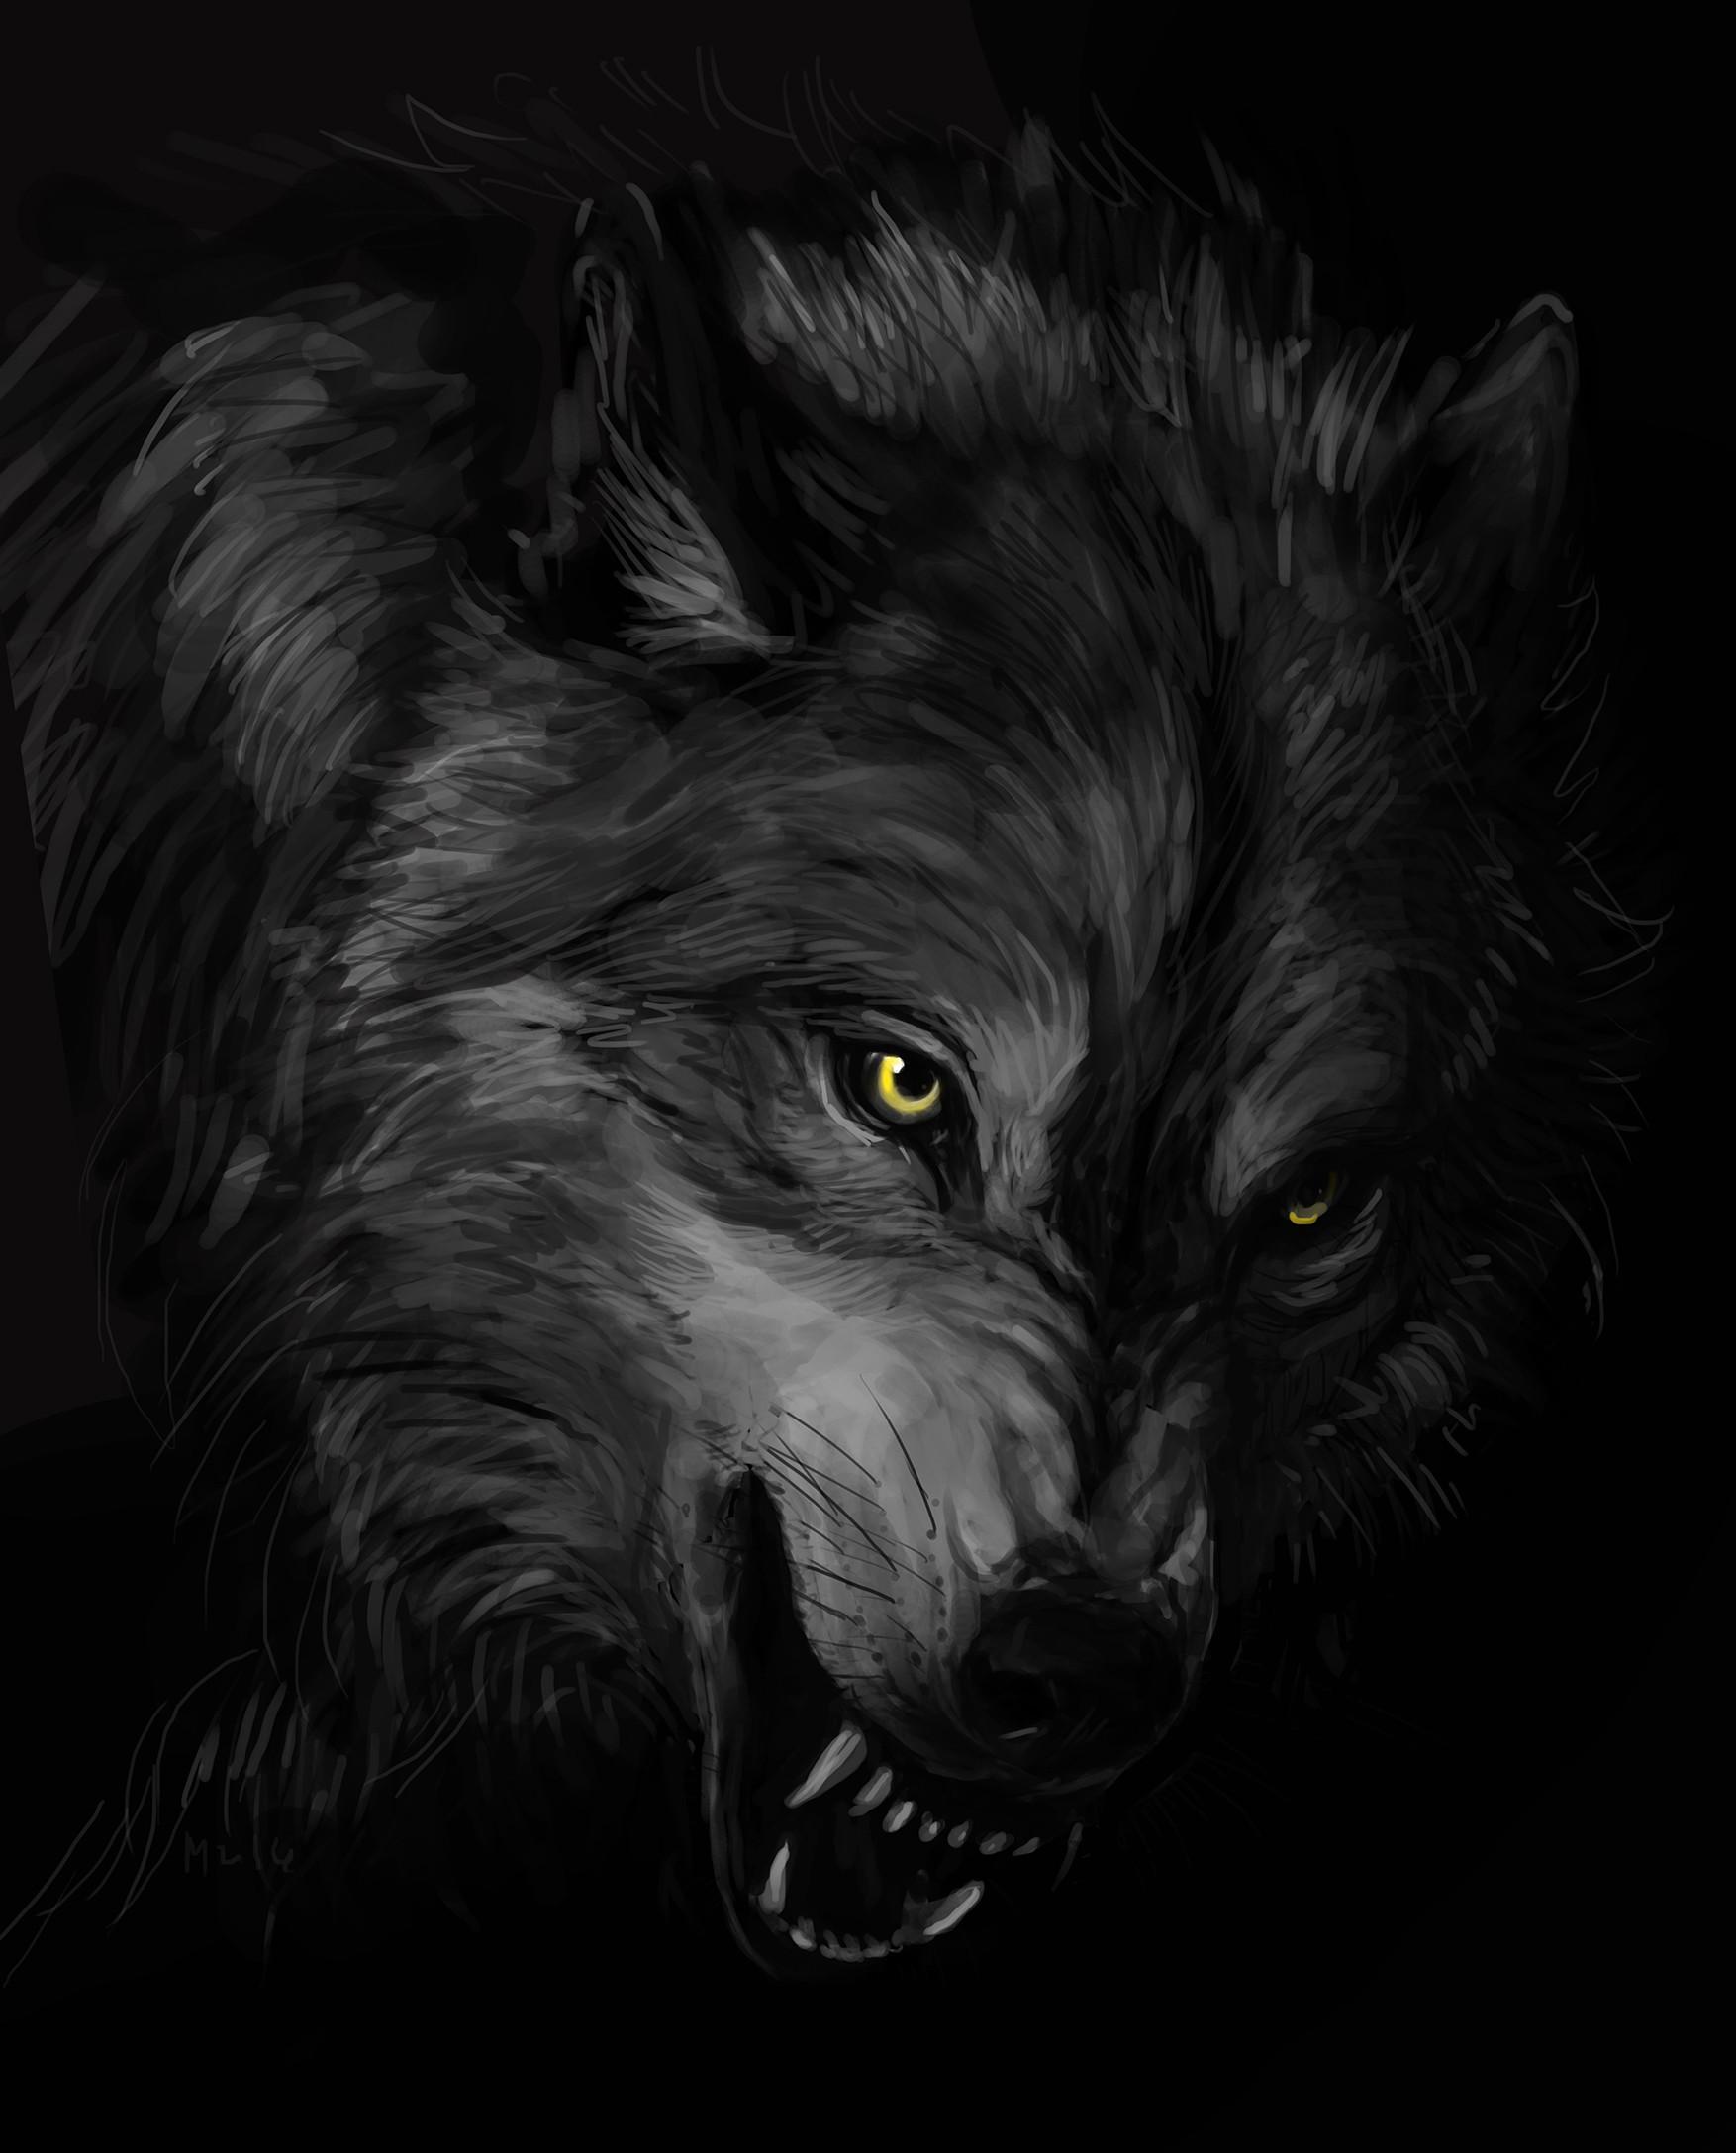 Dark Wolves Wallpapers Wallpaper Cave We have a massive amount of desktop and mobile backgrounds. dark wolves wallpapers wallpaper cave